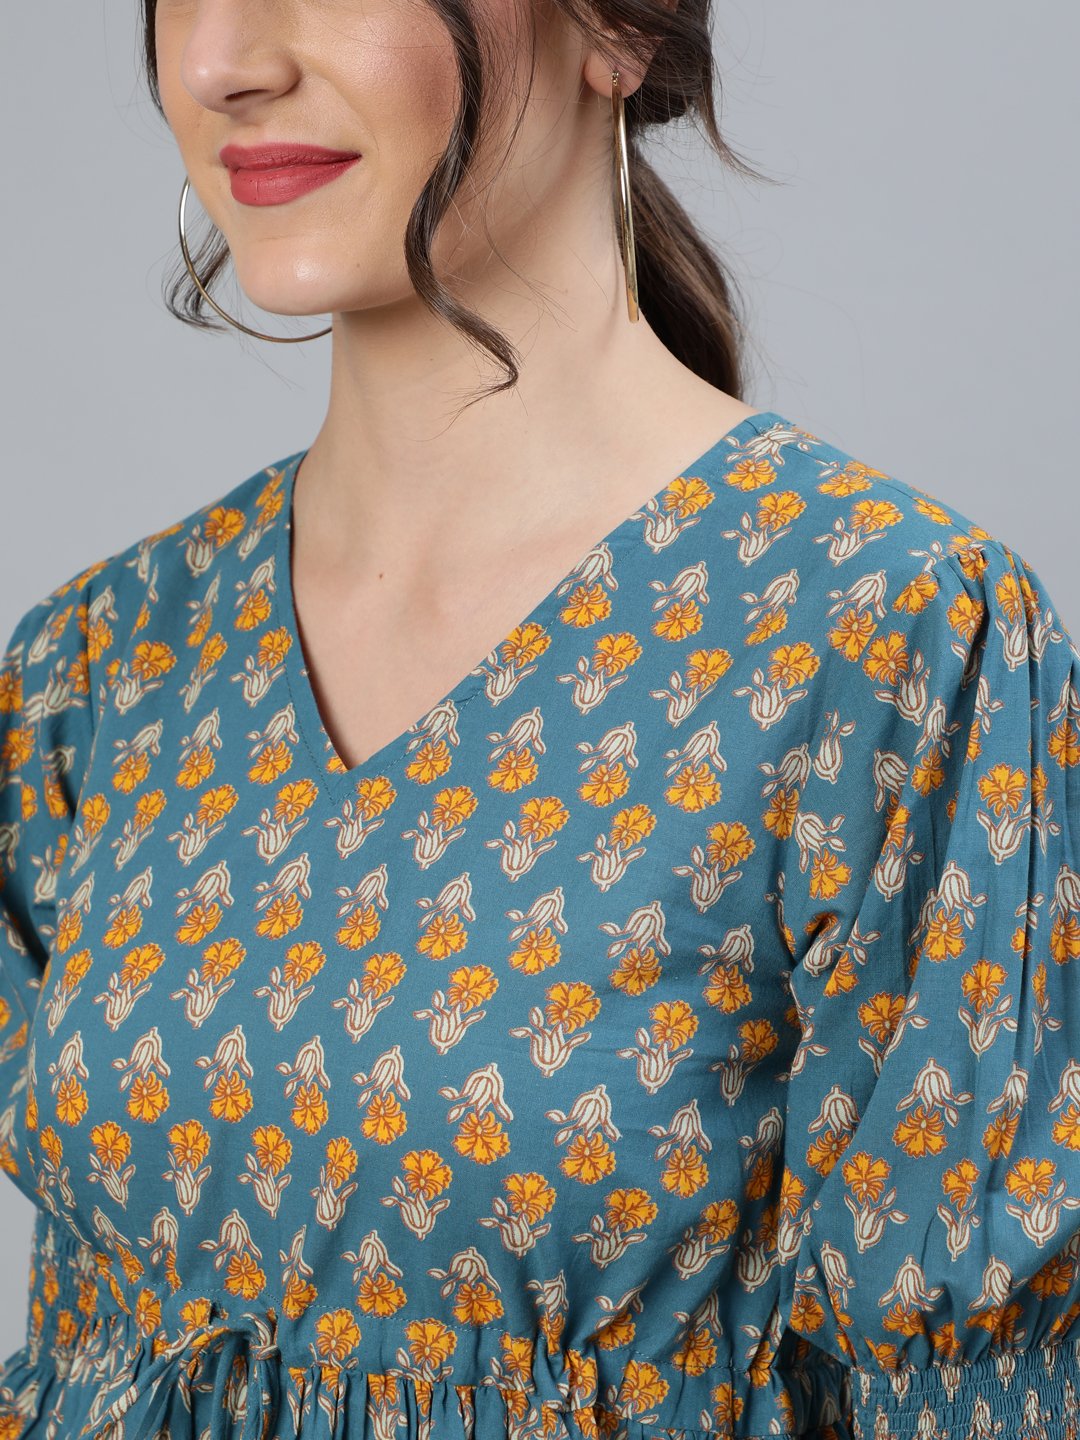 Women's Teal Blue & Yellow Printed Top With V Neck & Three Quarter Sleeves - Nayo Clothing